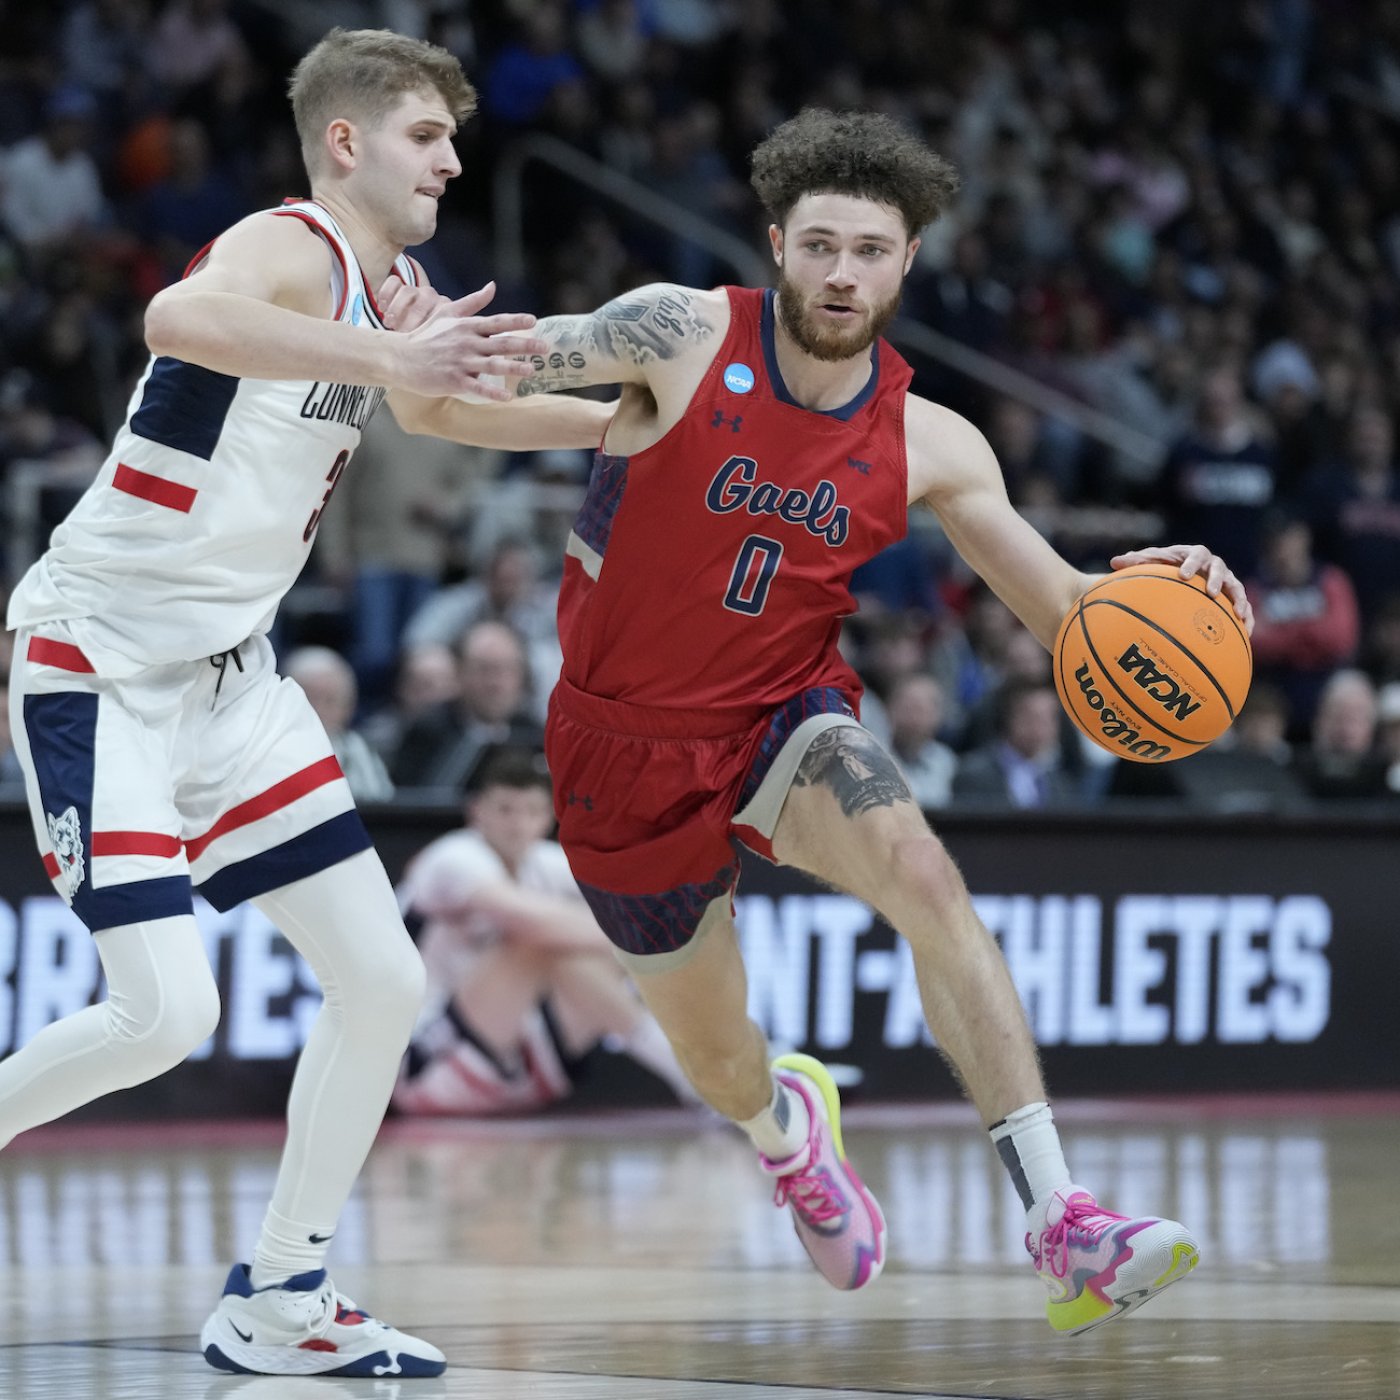 SMC basketball player Logan Johnson drives against a University of Connecticut player in NCAA tournament on March 19, 2023